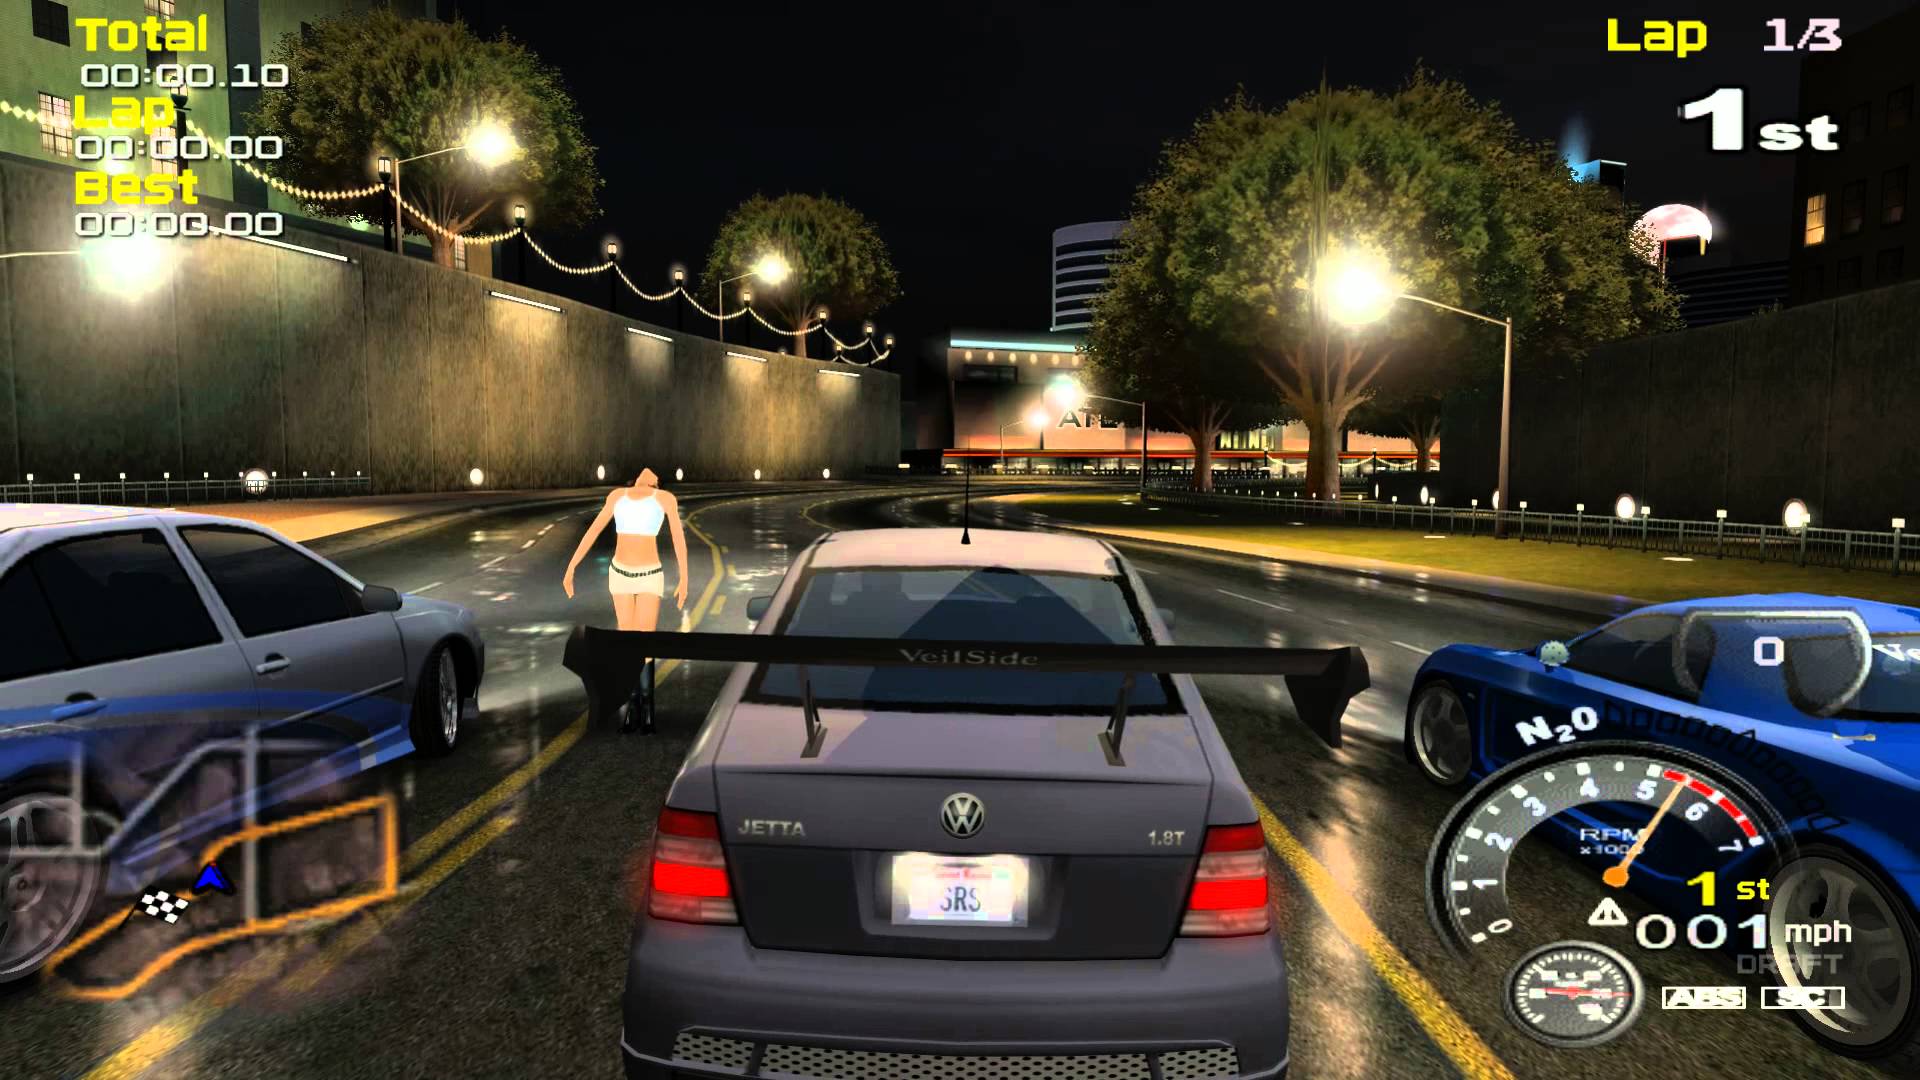 Street Racing Syndicate Backgrounds, Compatible - PC, Mobile, Gadgets| 1920x1080 px